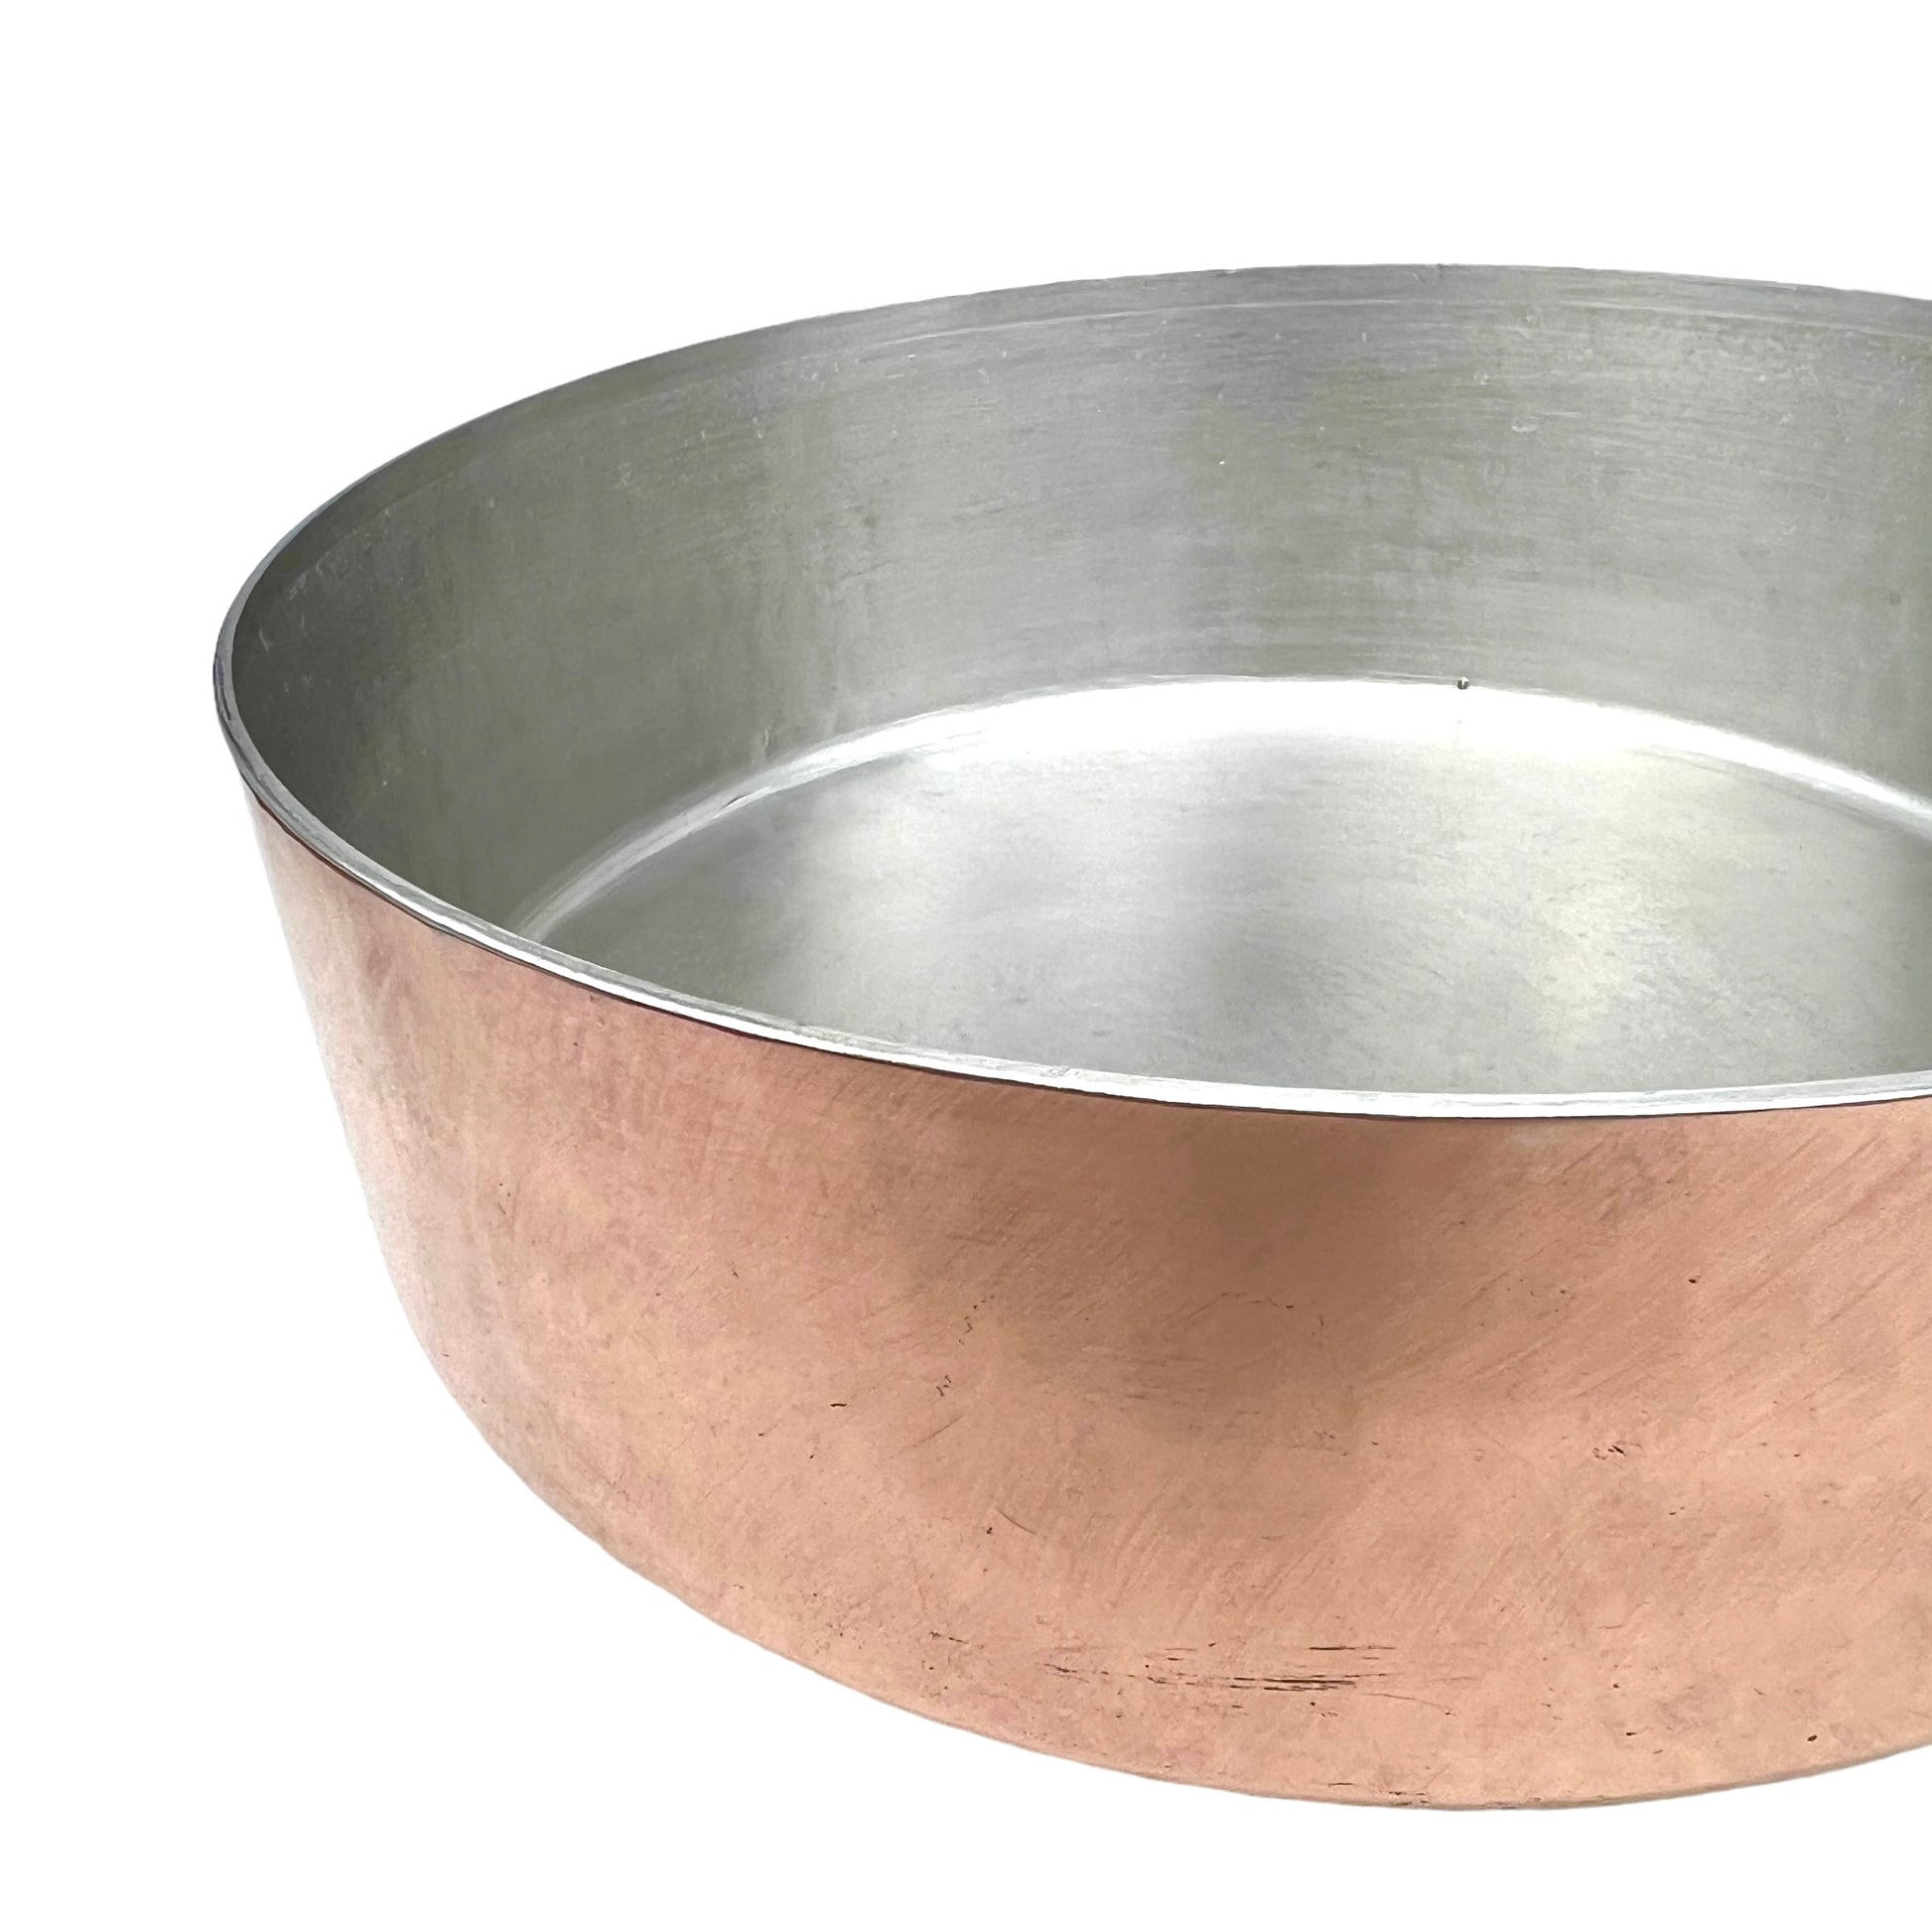 French 2mm solid copper frying pan refurbished with brand new tin lining